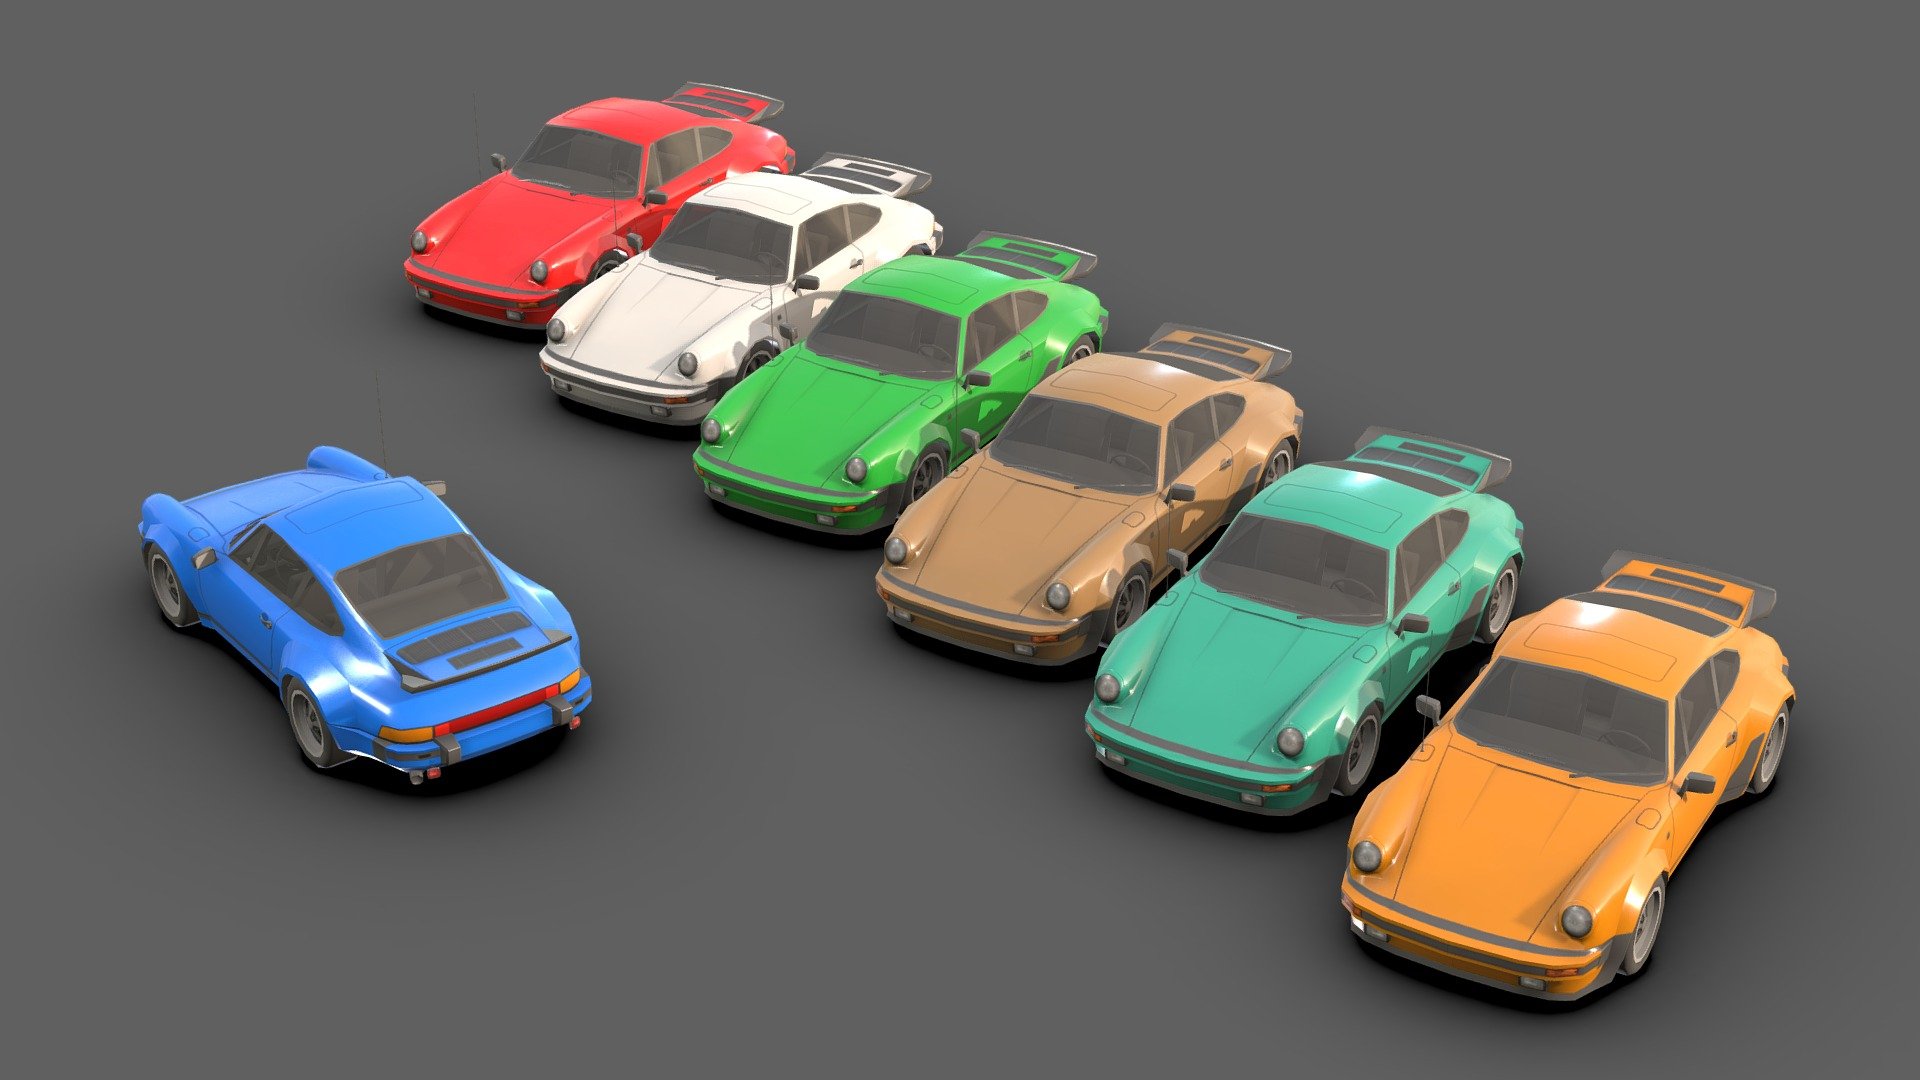 Classic Car # 7 .

You can use these models in any game and project.

This model is made with order and precision.

Separated parts (bodys . wheels . Steer ).

This car has 7 different colors.

Very Low- Poly.

The interior of this car is very low poly.

Average poly count: 5,000 tris.

Texture size: 2048 / 1024 / 512 (PNG).

It has a UV map texture.

Number of textures: 3.

Number of materials: 4.

Format: Fbx / Obj / 3DMax .

The original files are in the Additional file .

Wait for my new models.. Your friend (Sidra) 3d model